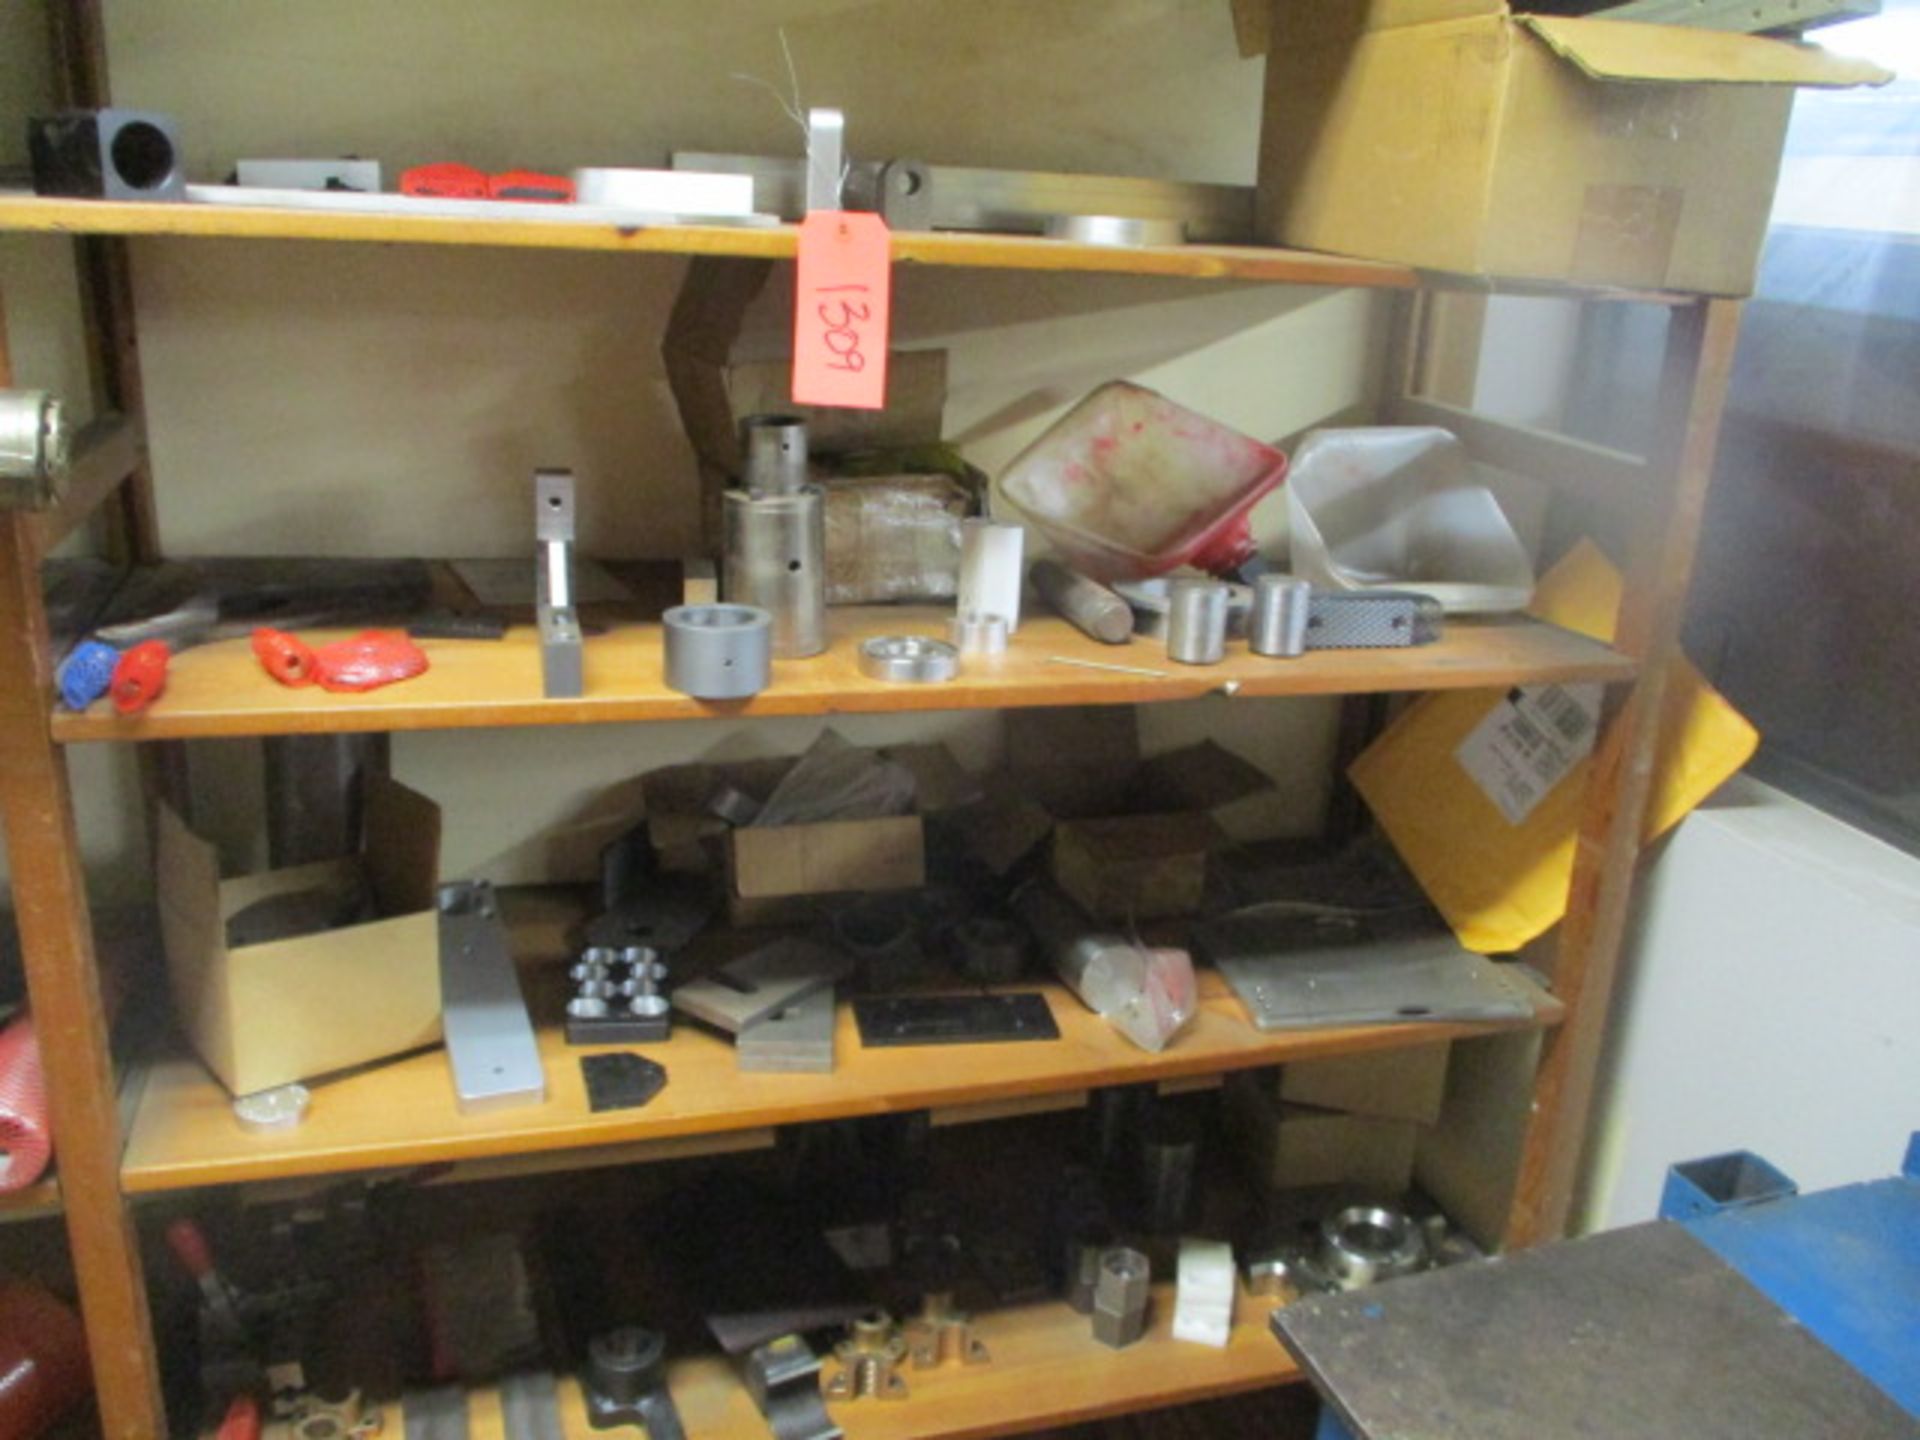 4 shelves of metal items and parts